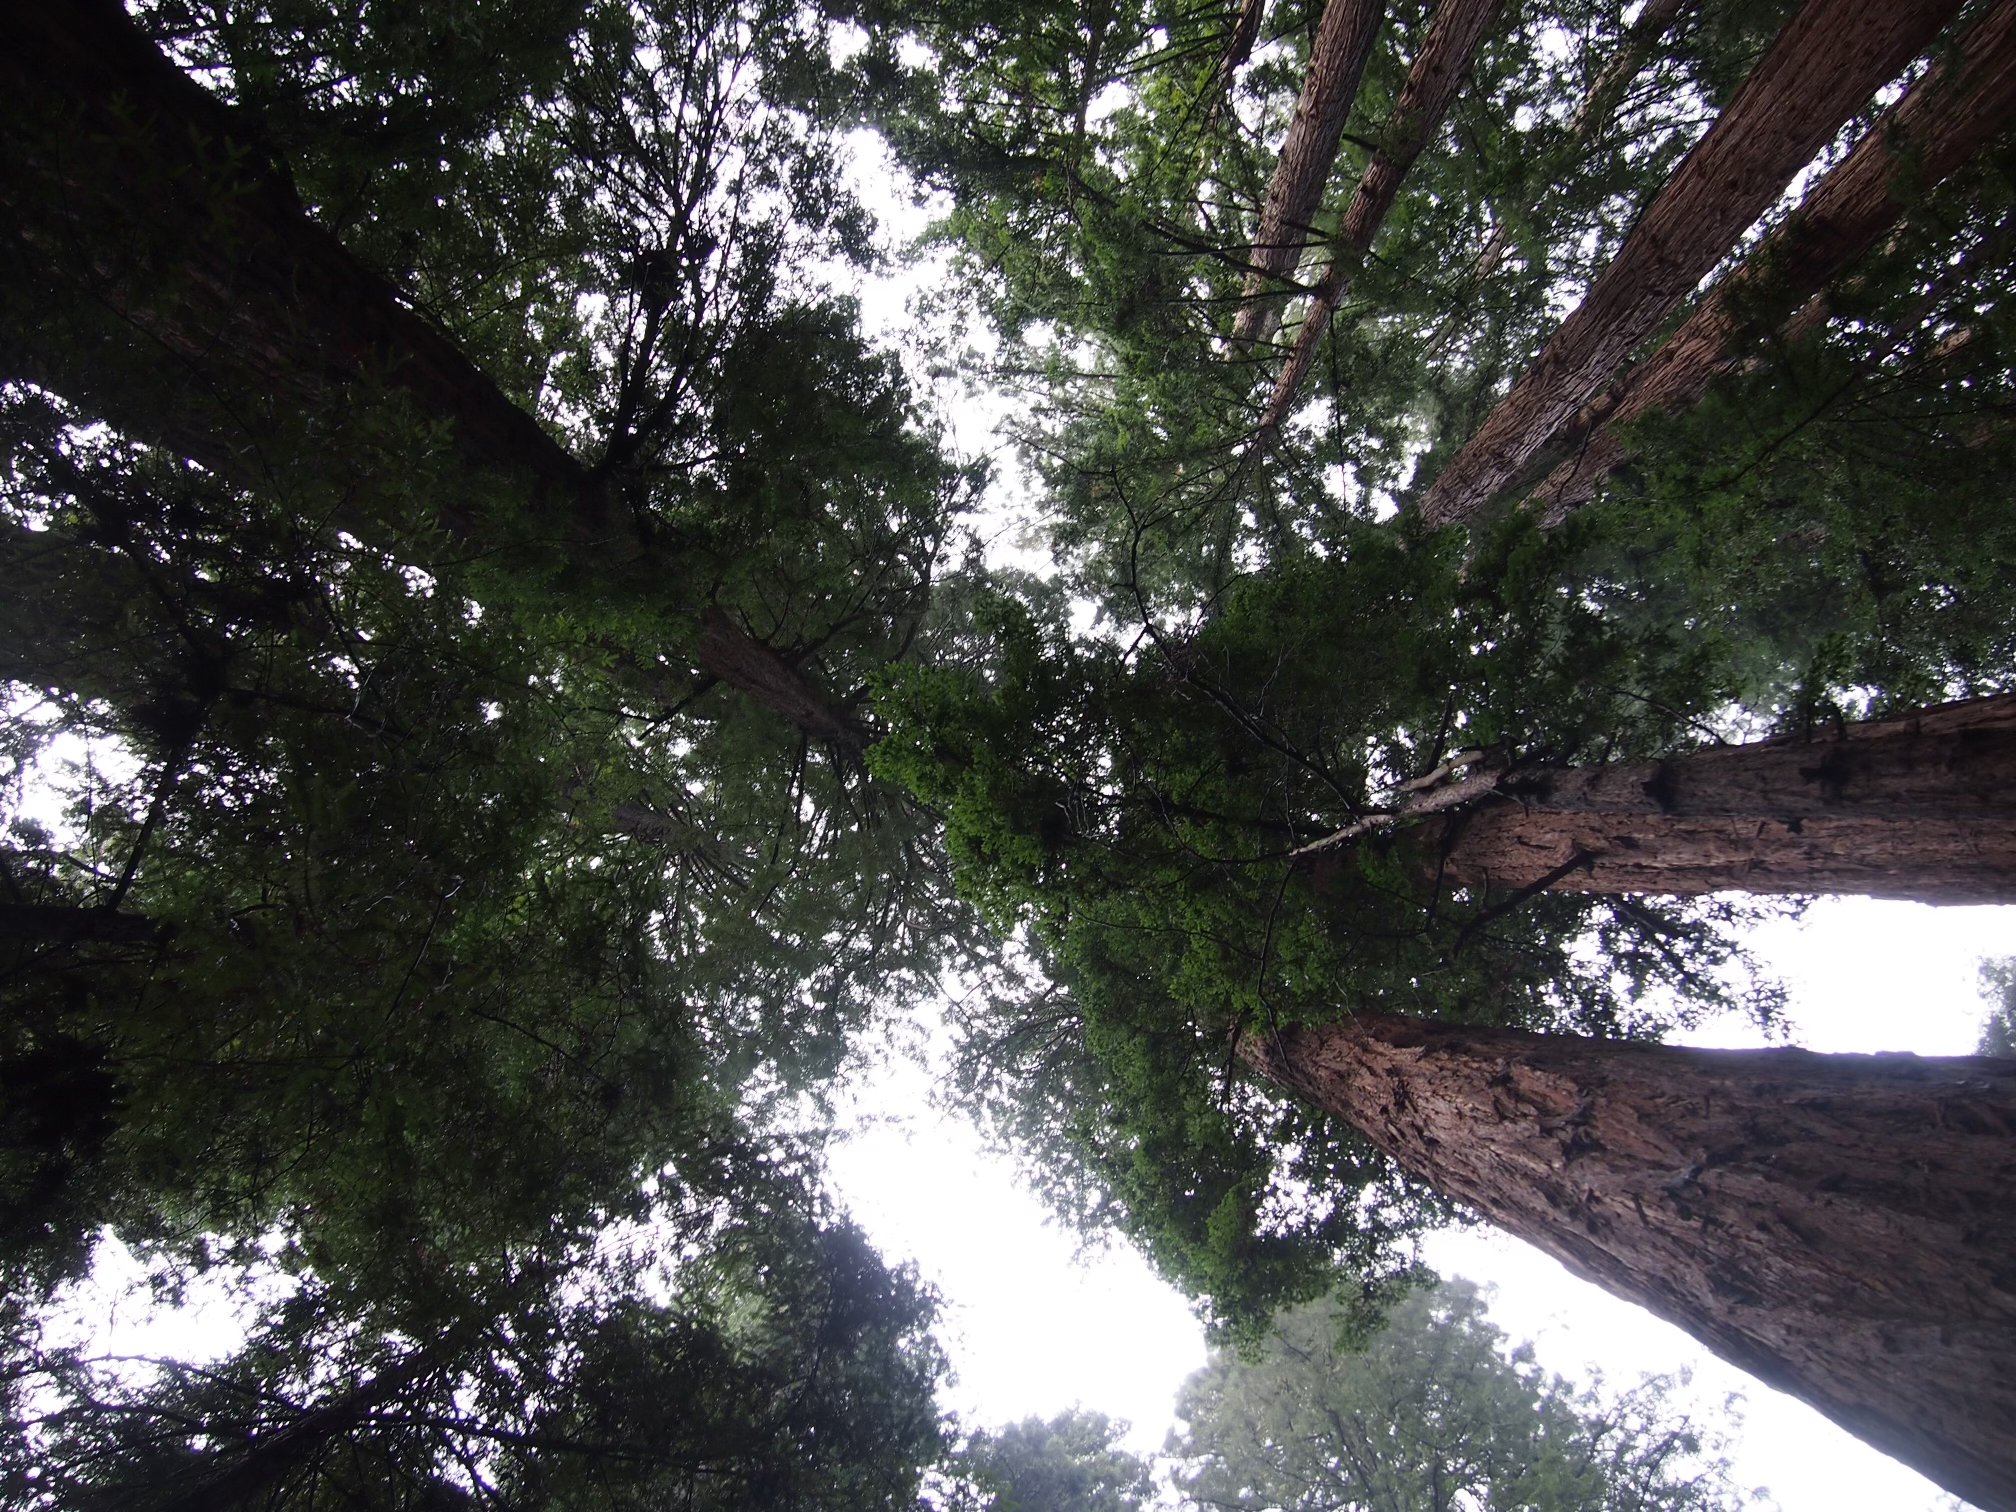 A photo taken from a forest floor, looking upward toward the tops of tall trees. Six large, rugged brown tree trunks surround the viewer, stretching up to a green leafy canopy overhead. Smaller trees fill in the gaps between. It is a cloudy day and the sky appears bright white.